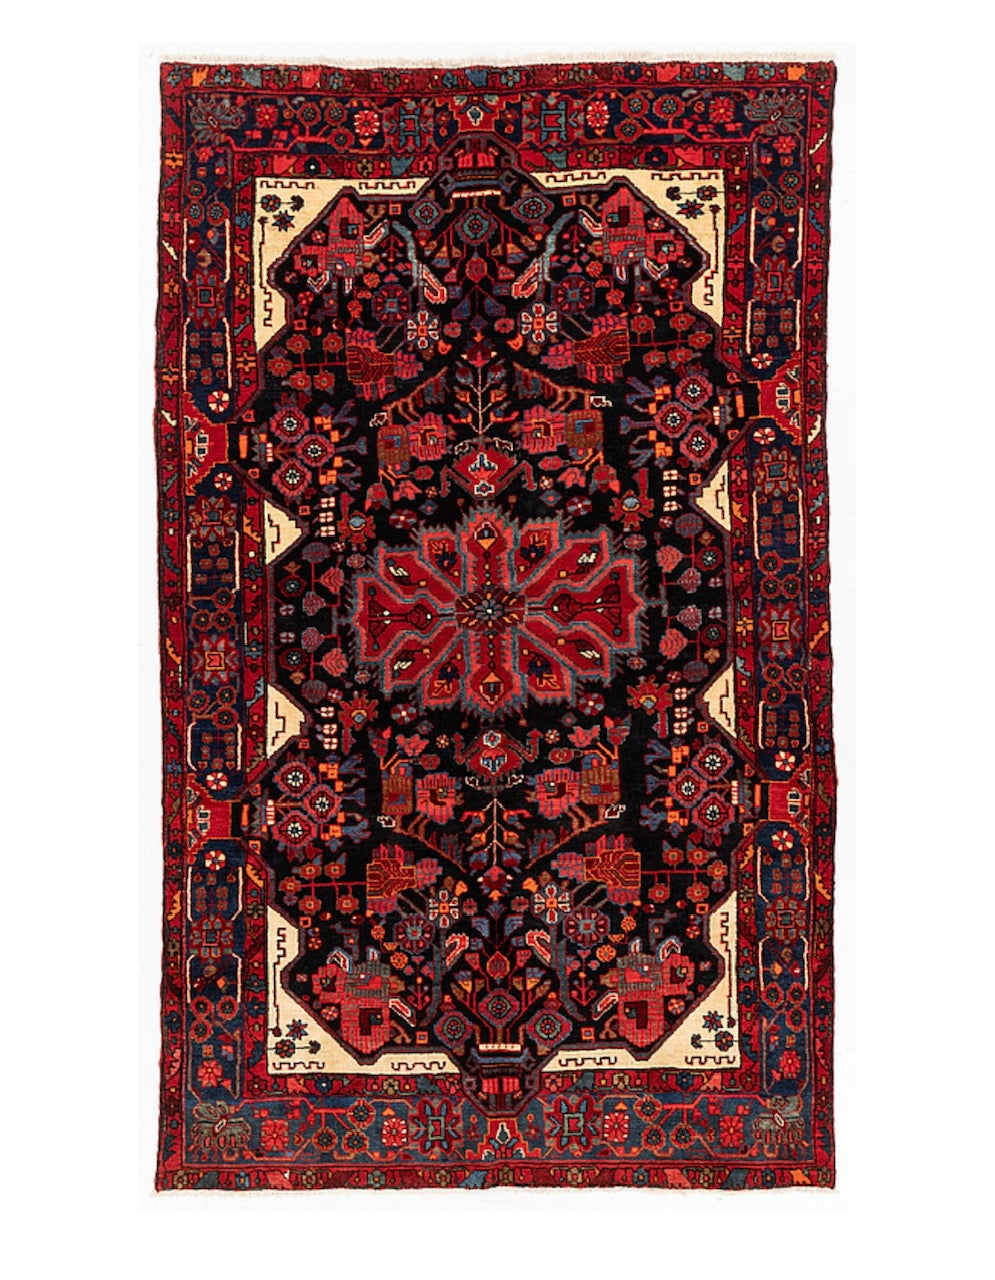 Nahavand Persian handmade carpet with a wounderful color setting, in mint condition, size 148 x 198 cm!